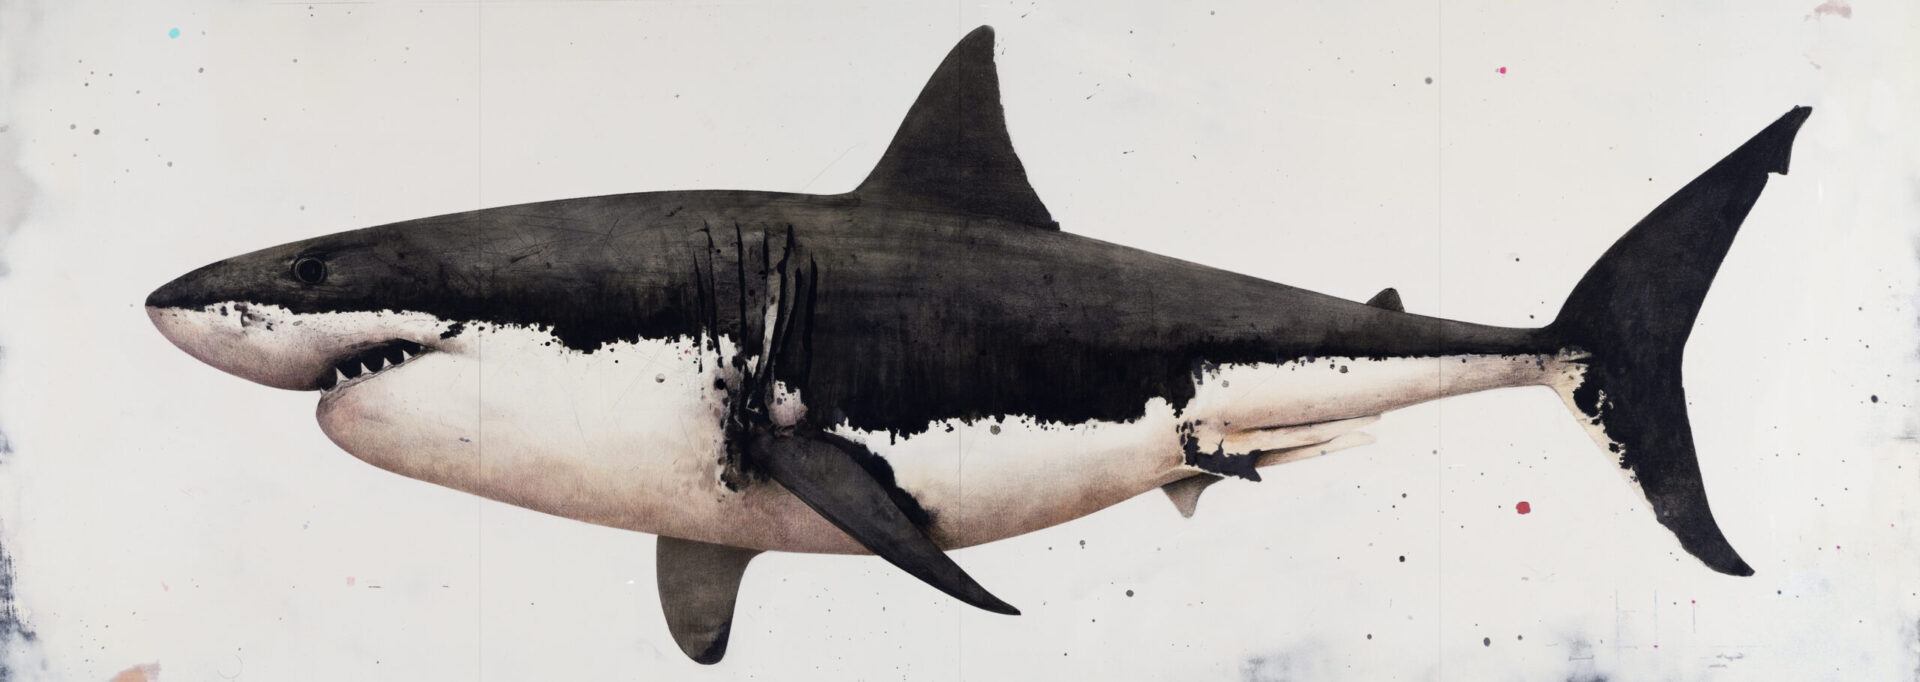 DM White Shark 2020 121x292 cm Etching ed. 255PA Print with Chine Colle on Zerkall Butten paper scaled Pigment Gallery Galería de Arte en Barcelona White Shark